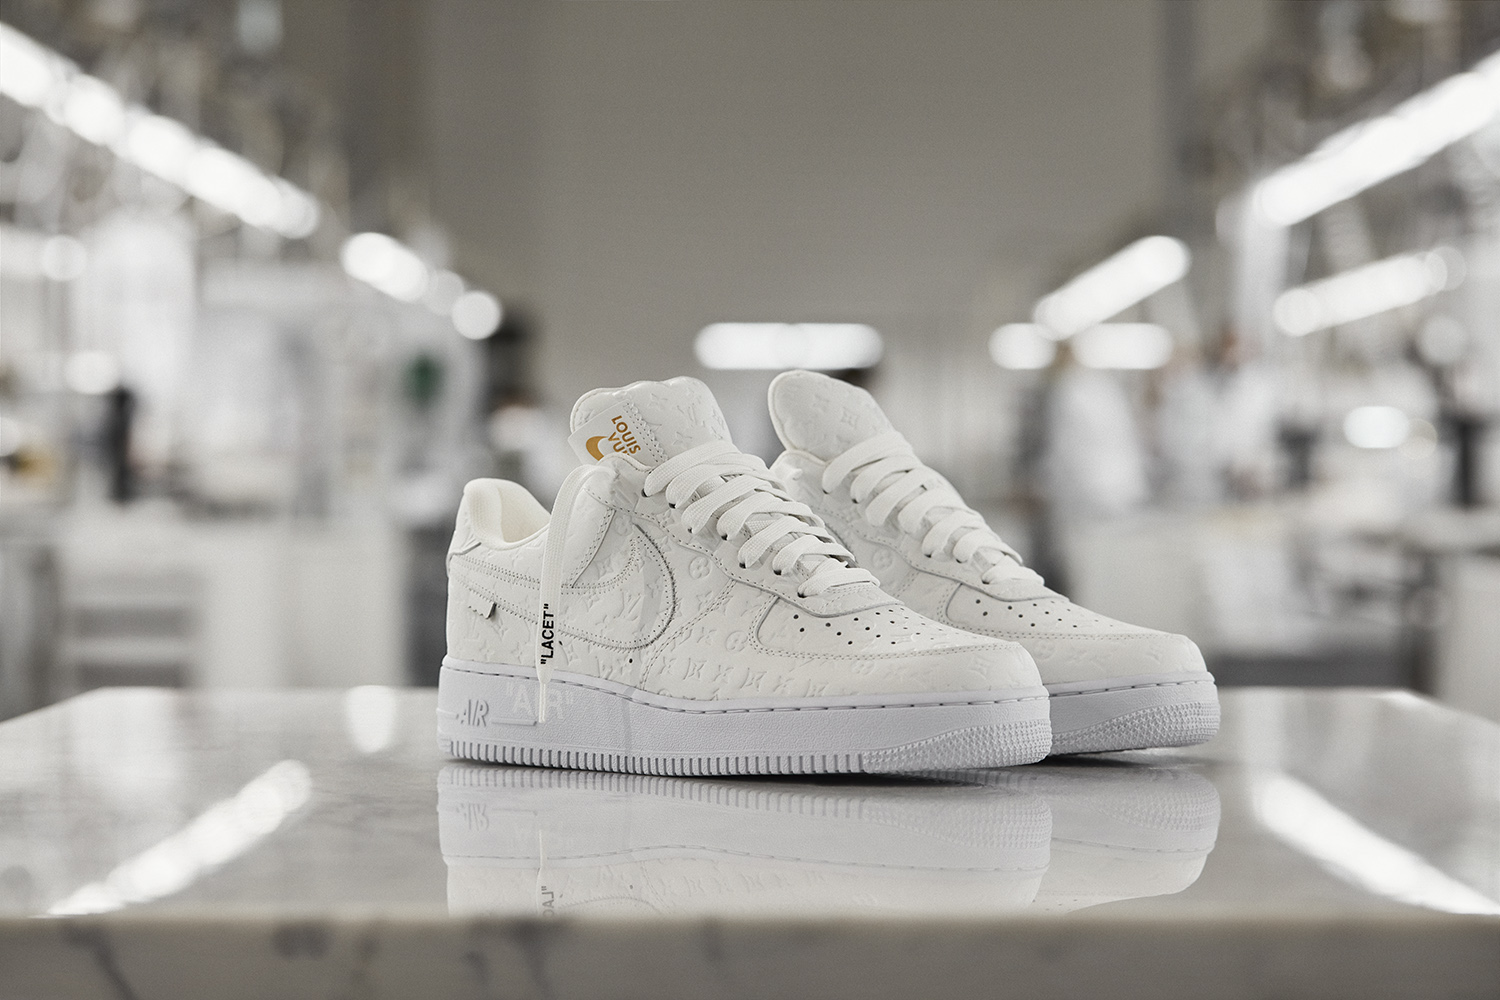 Louis Vuitton, Virgil Abloh, and Nike: The Expression of the “Air Force 1”